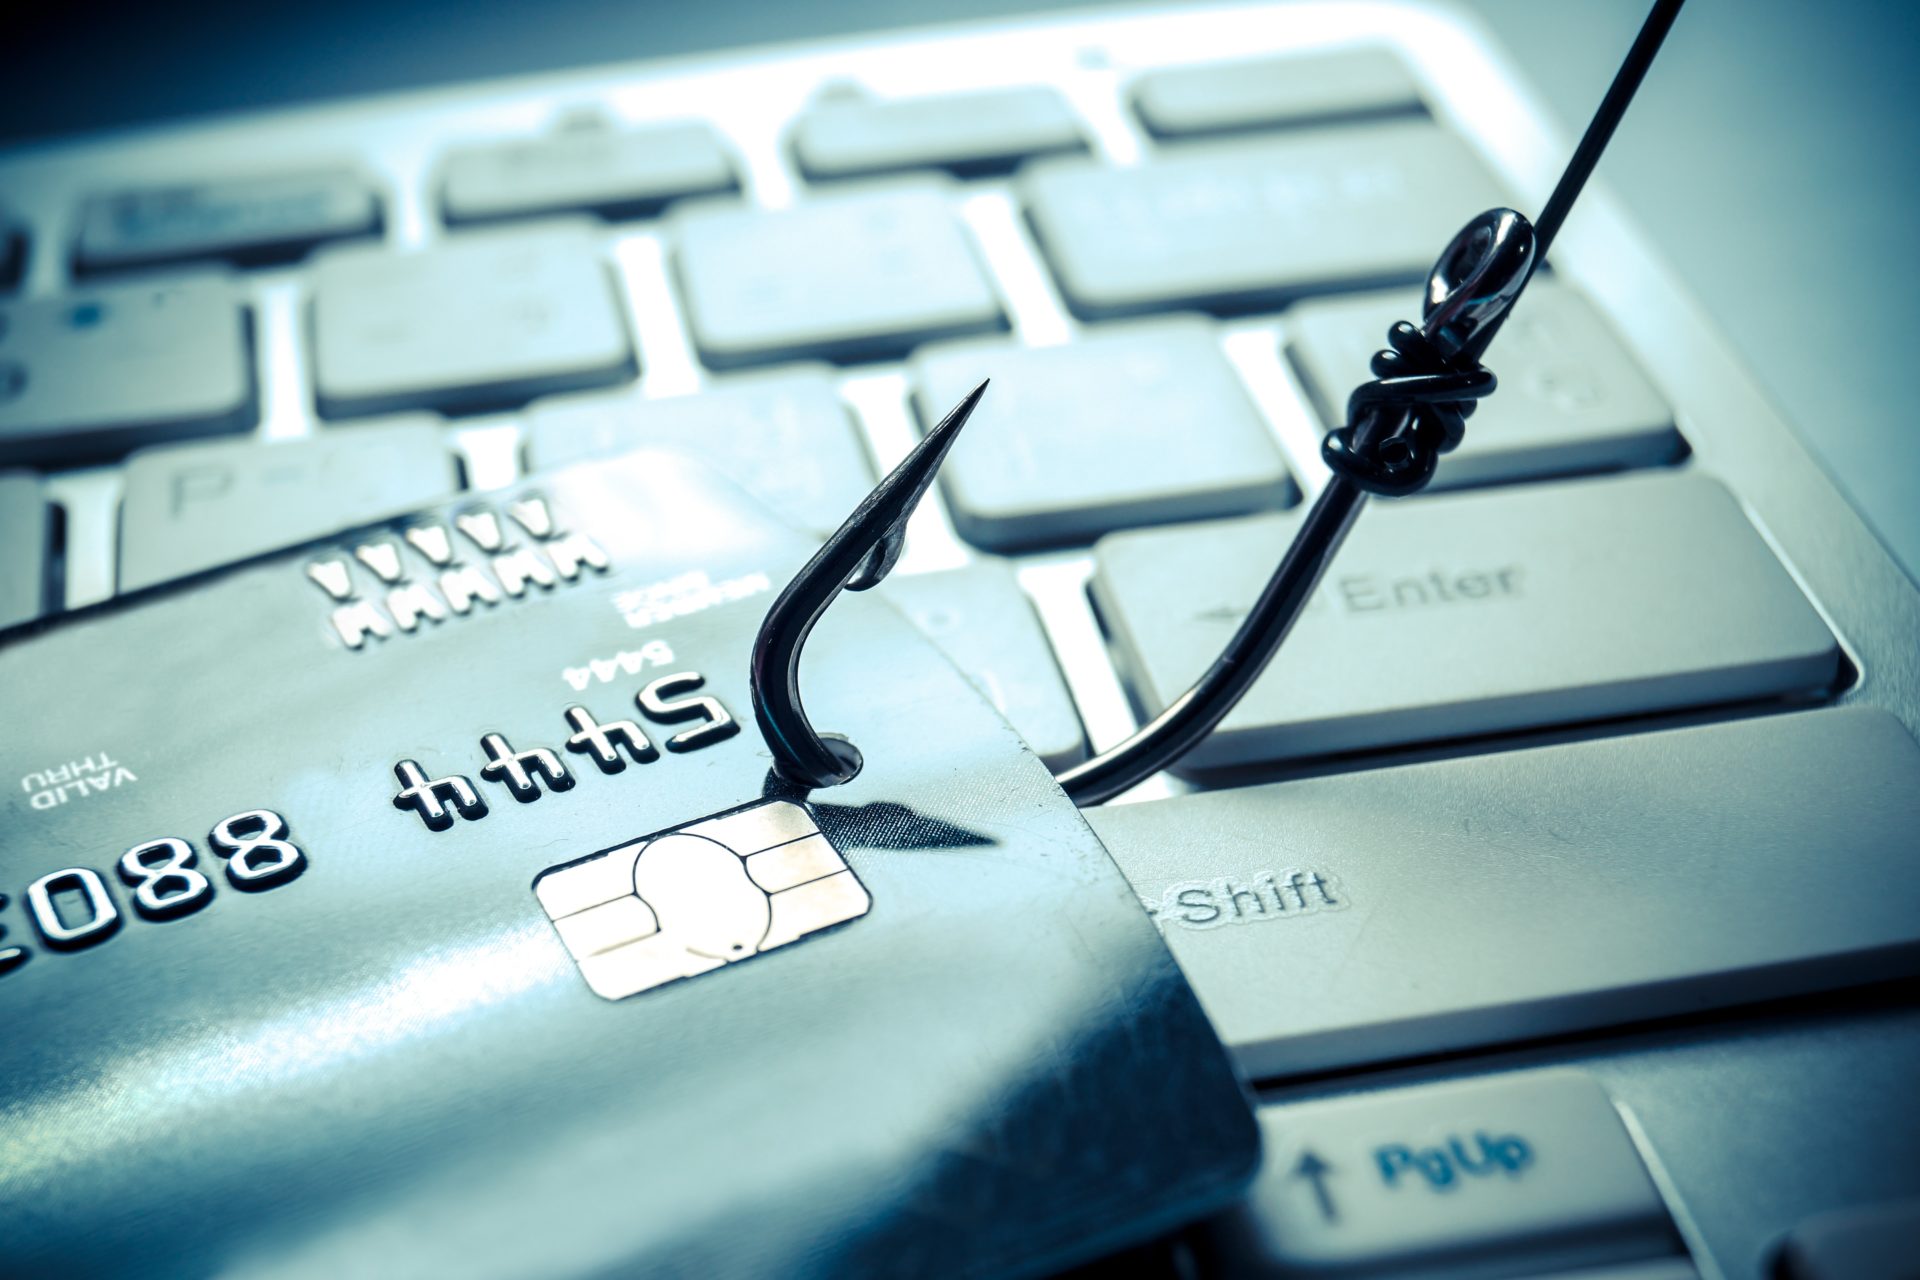 Singapore Phishing Websites Using Fake News to Get Users’ Bank and Credit Card Details